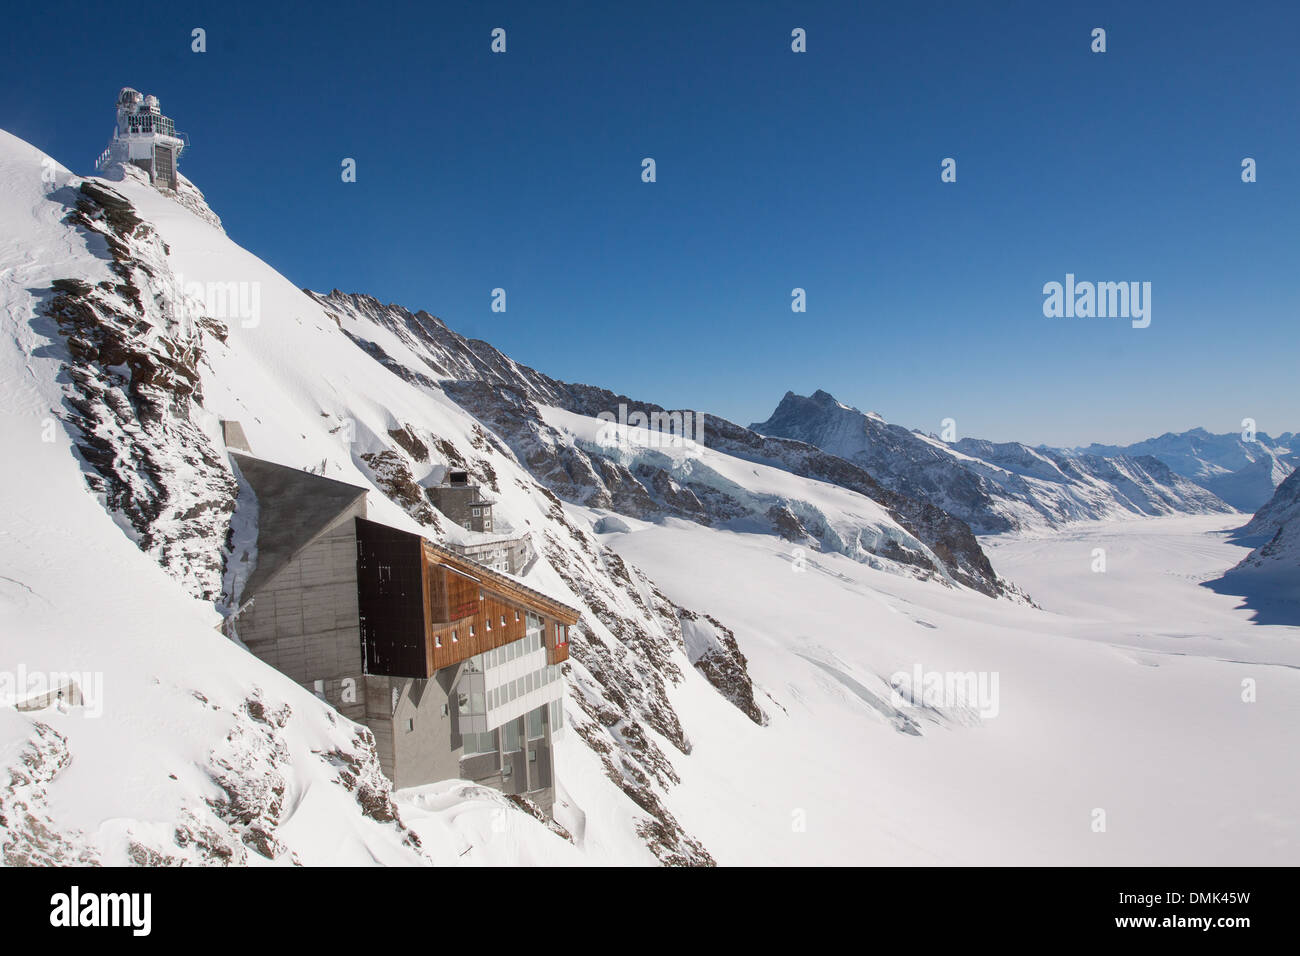 WINTRY SCENE OF THE ALETSCH GLACIER AND THE JUNGFRAUJOCH PASS WITH THE OBSERVATORY NICKNAMED THE SPHINX AT ITS SUMMIT, THE JUNGFRAU, BERNESE ALPS, CANTON OF BERN, SWITZERLAND Stock Photo